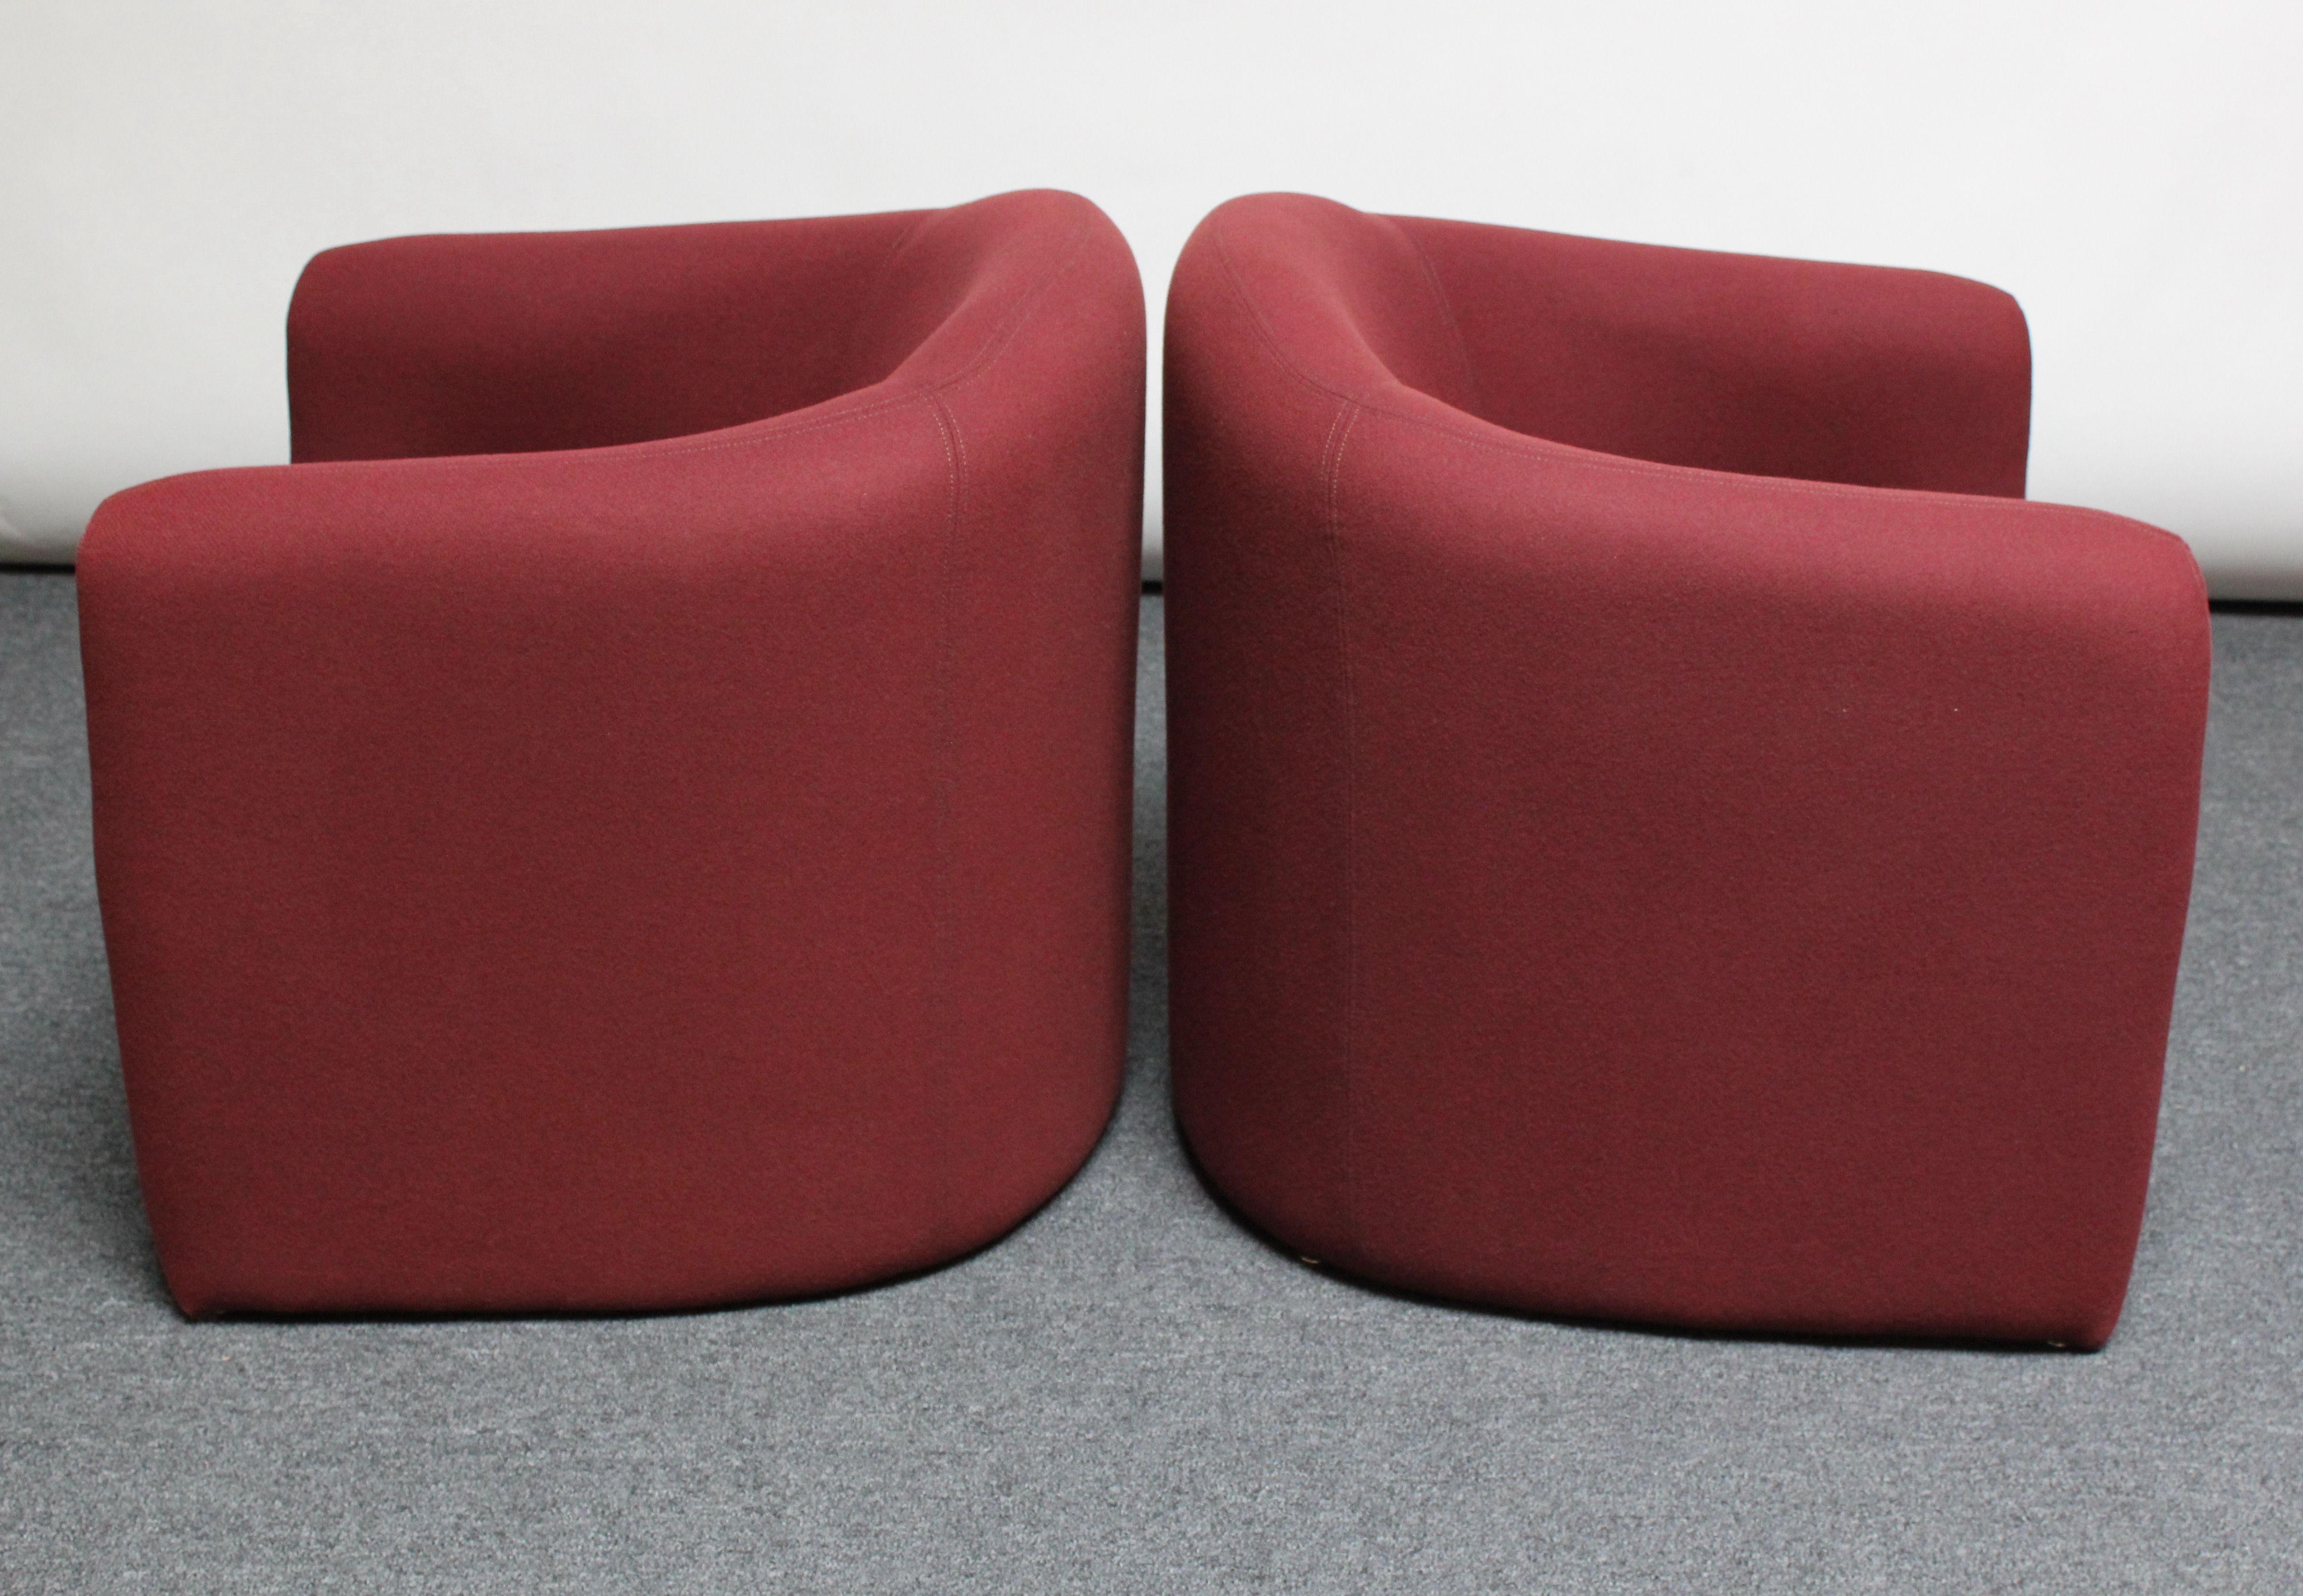 Pair of Vintage Biomorphic Lounge Chairs by Vladimir Kagan for Preview 2